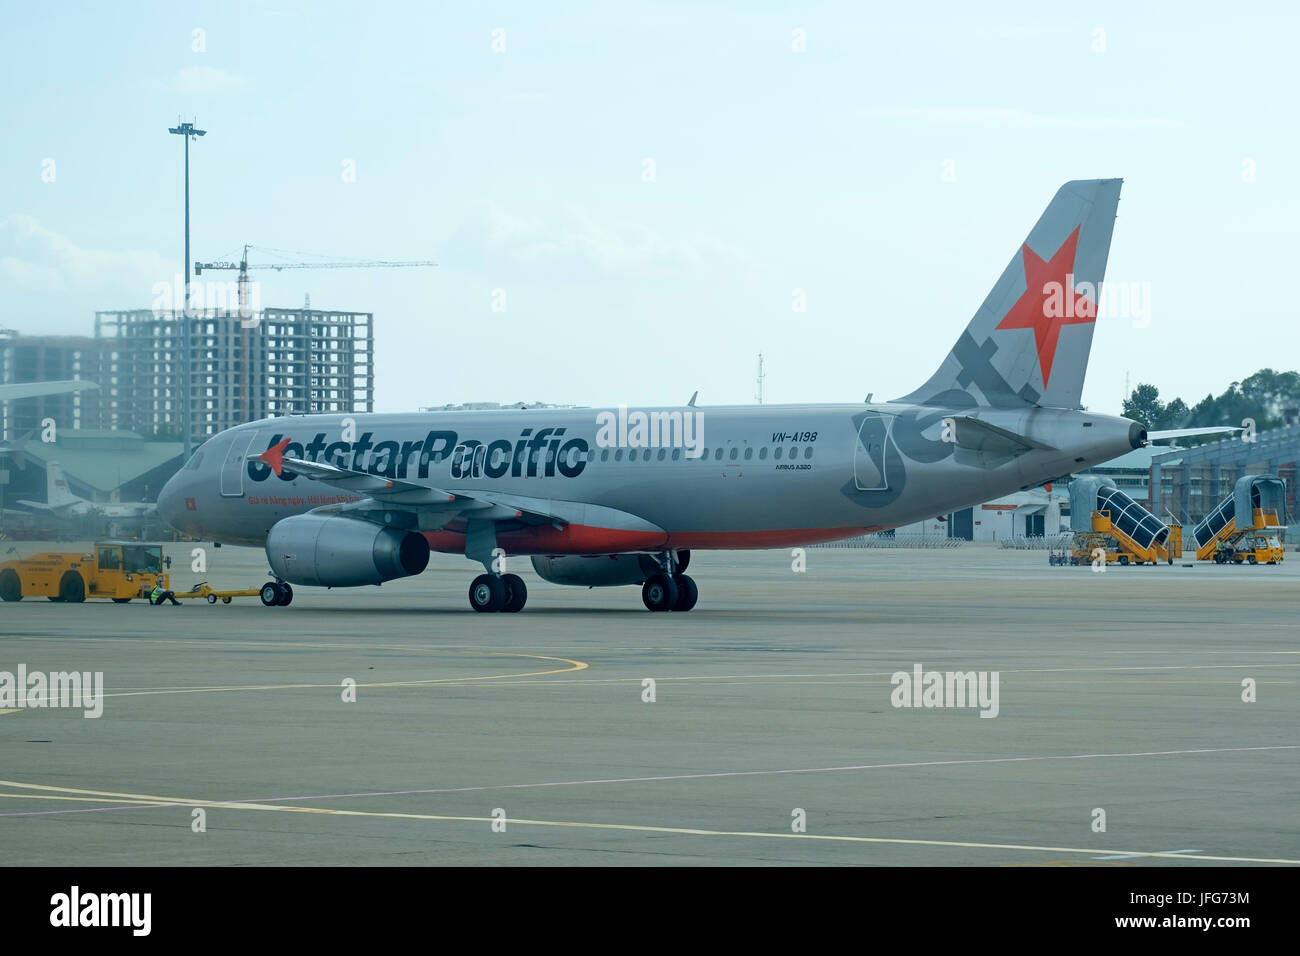 JetStar Pacific Airlines Boeing A320 airplane Stock Photo